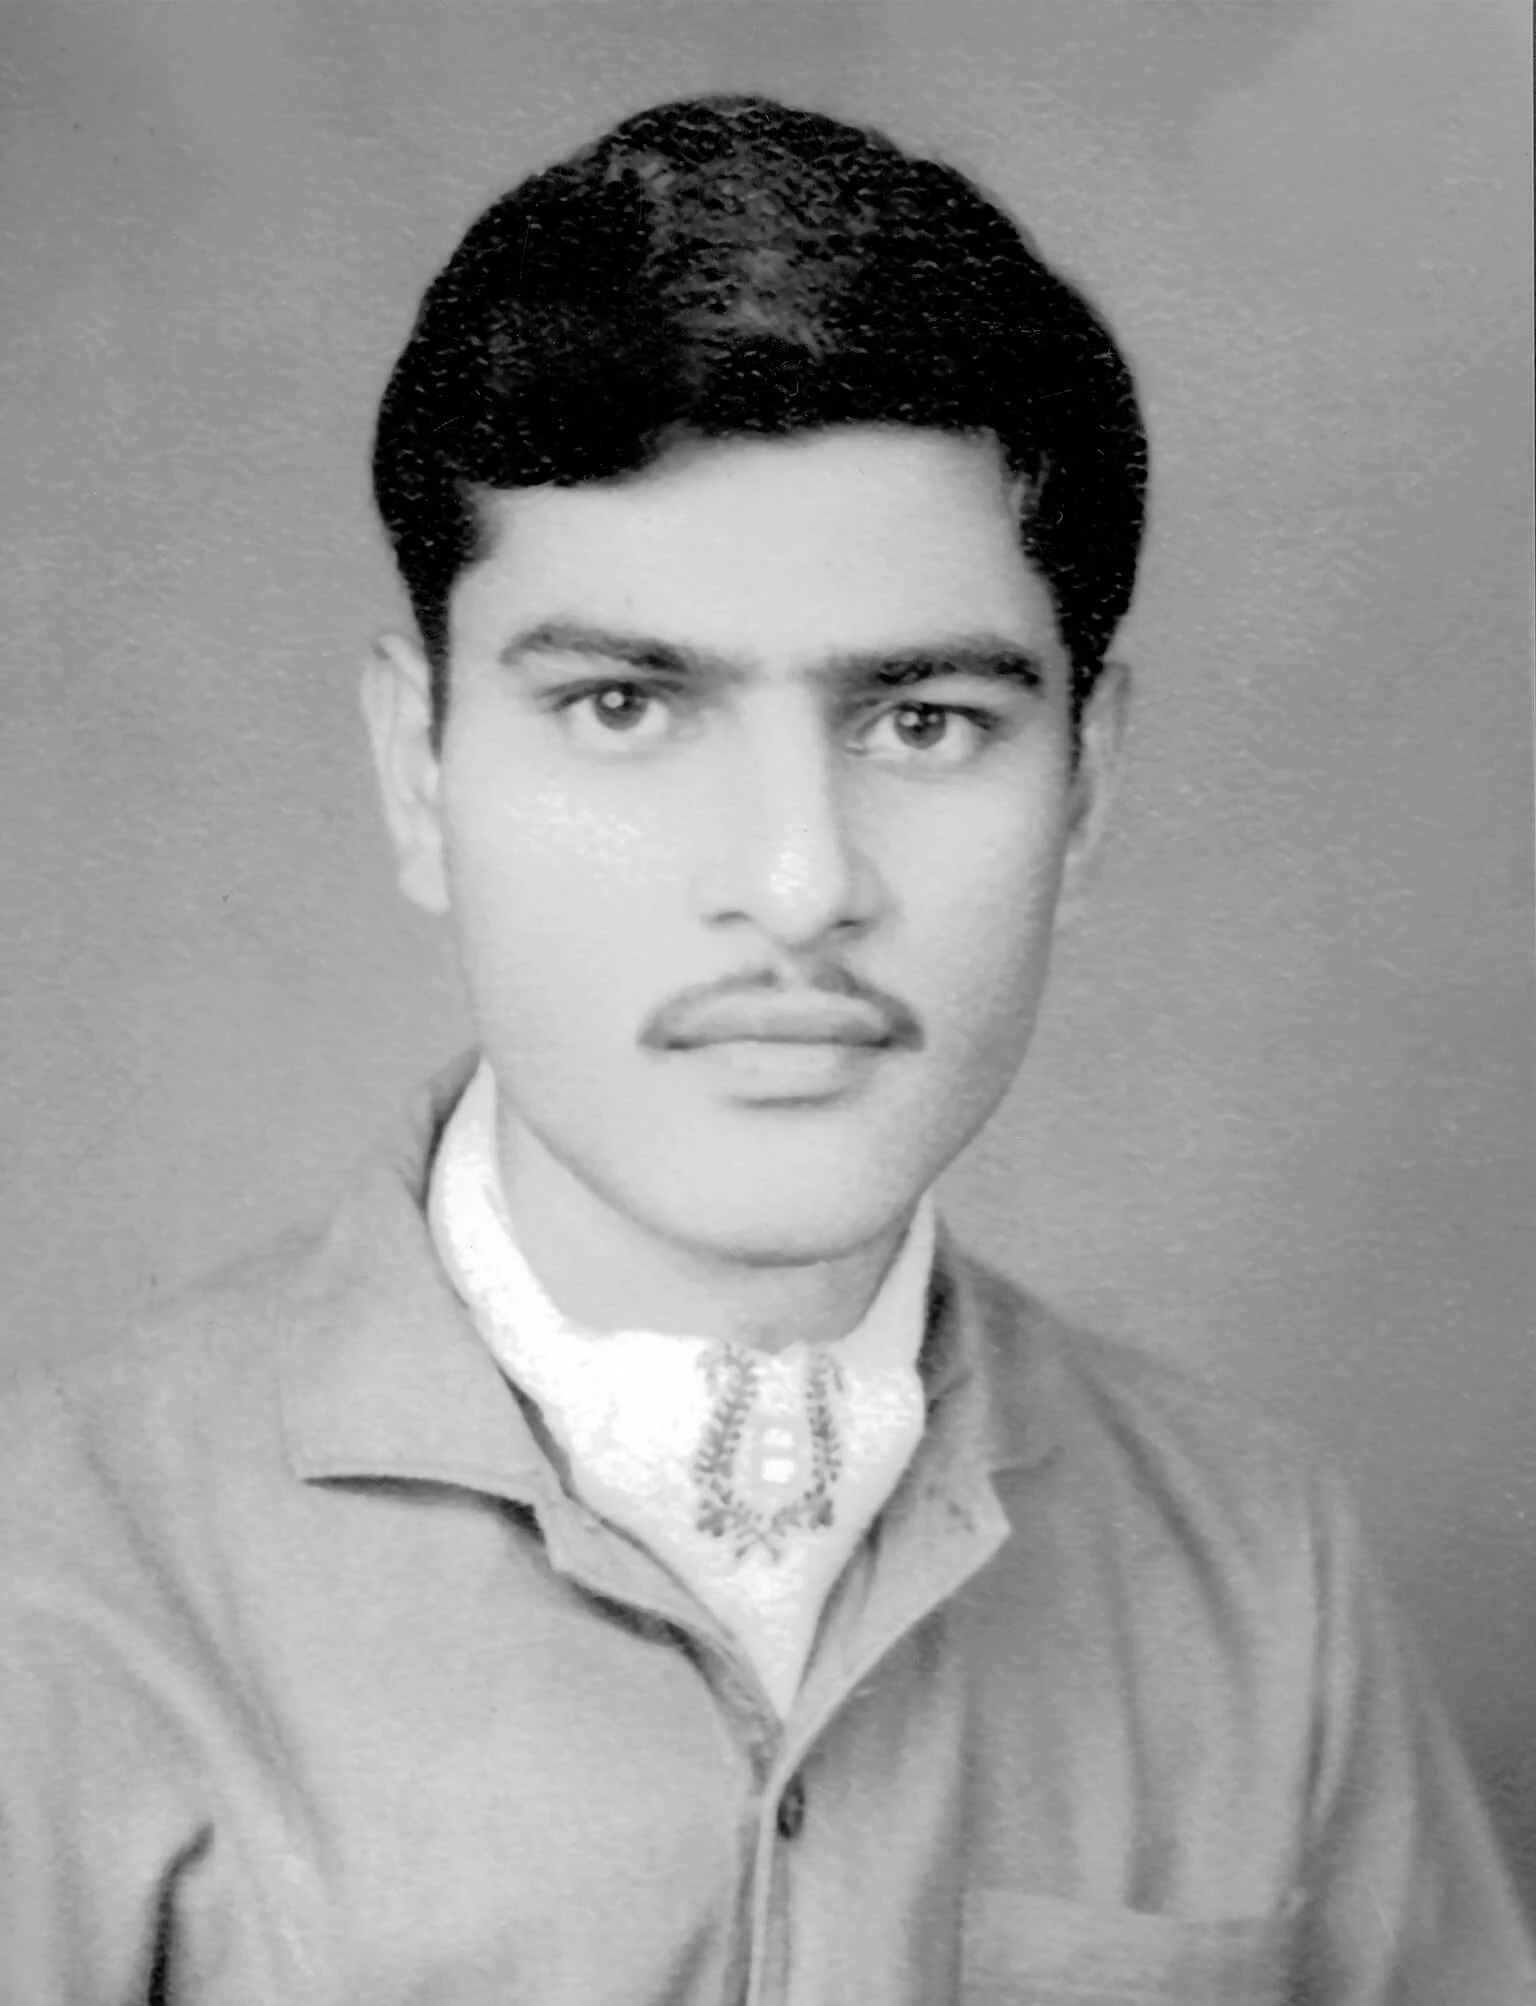 Black and white photo of Balwant Singh, with a faint mustasche, black hair, and wearing a light-colored collared shirt and scarf.